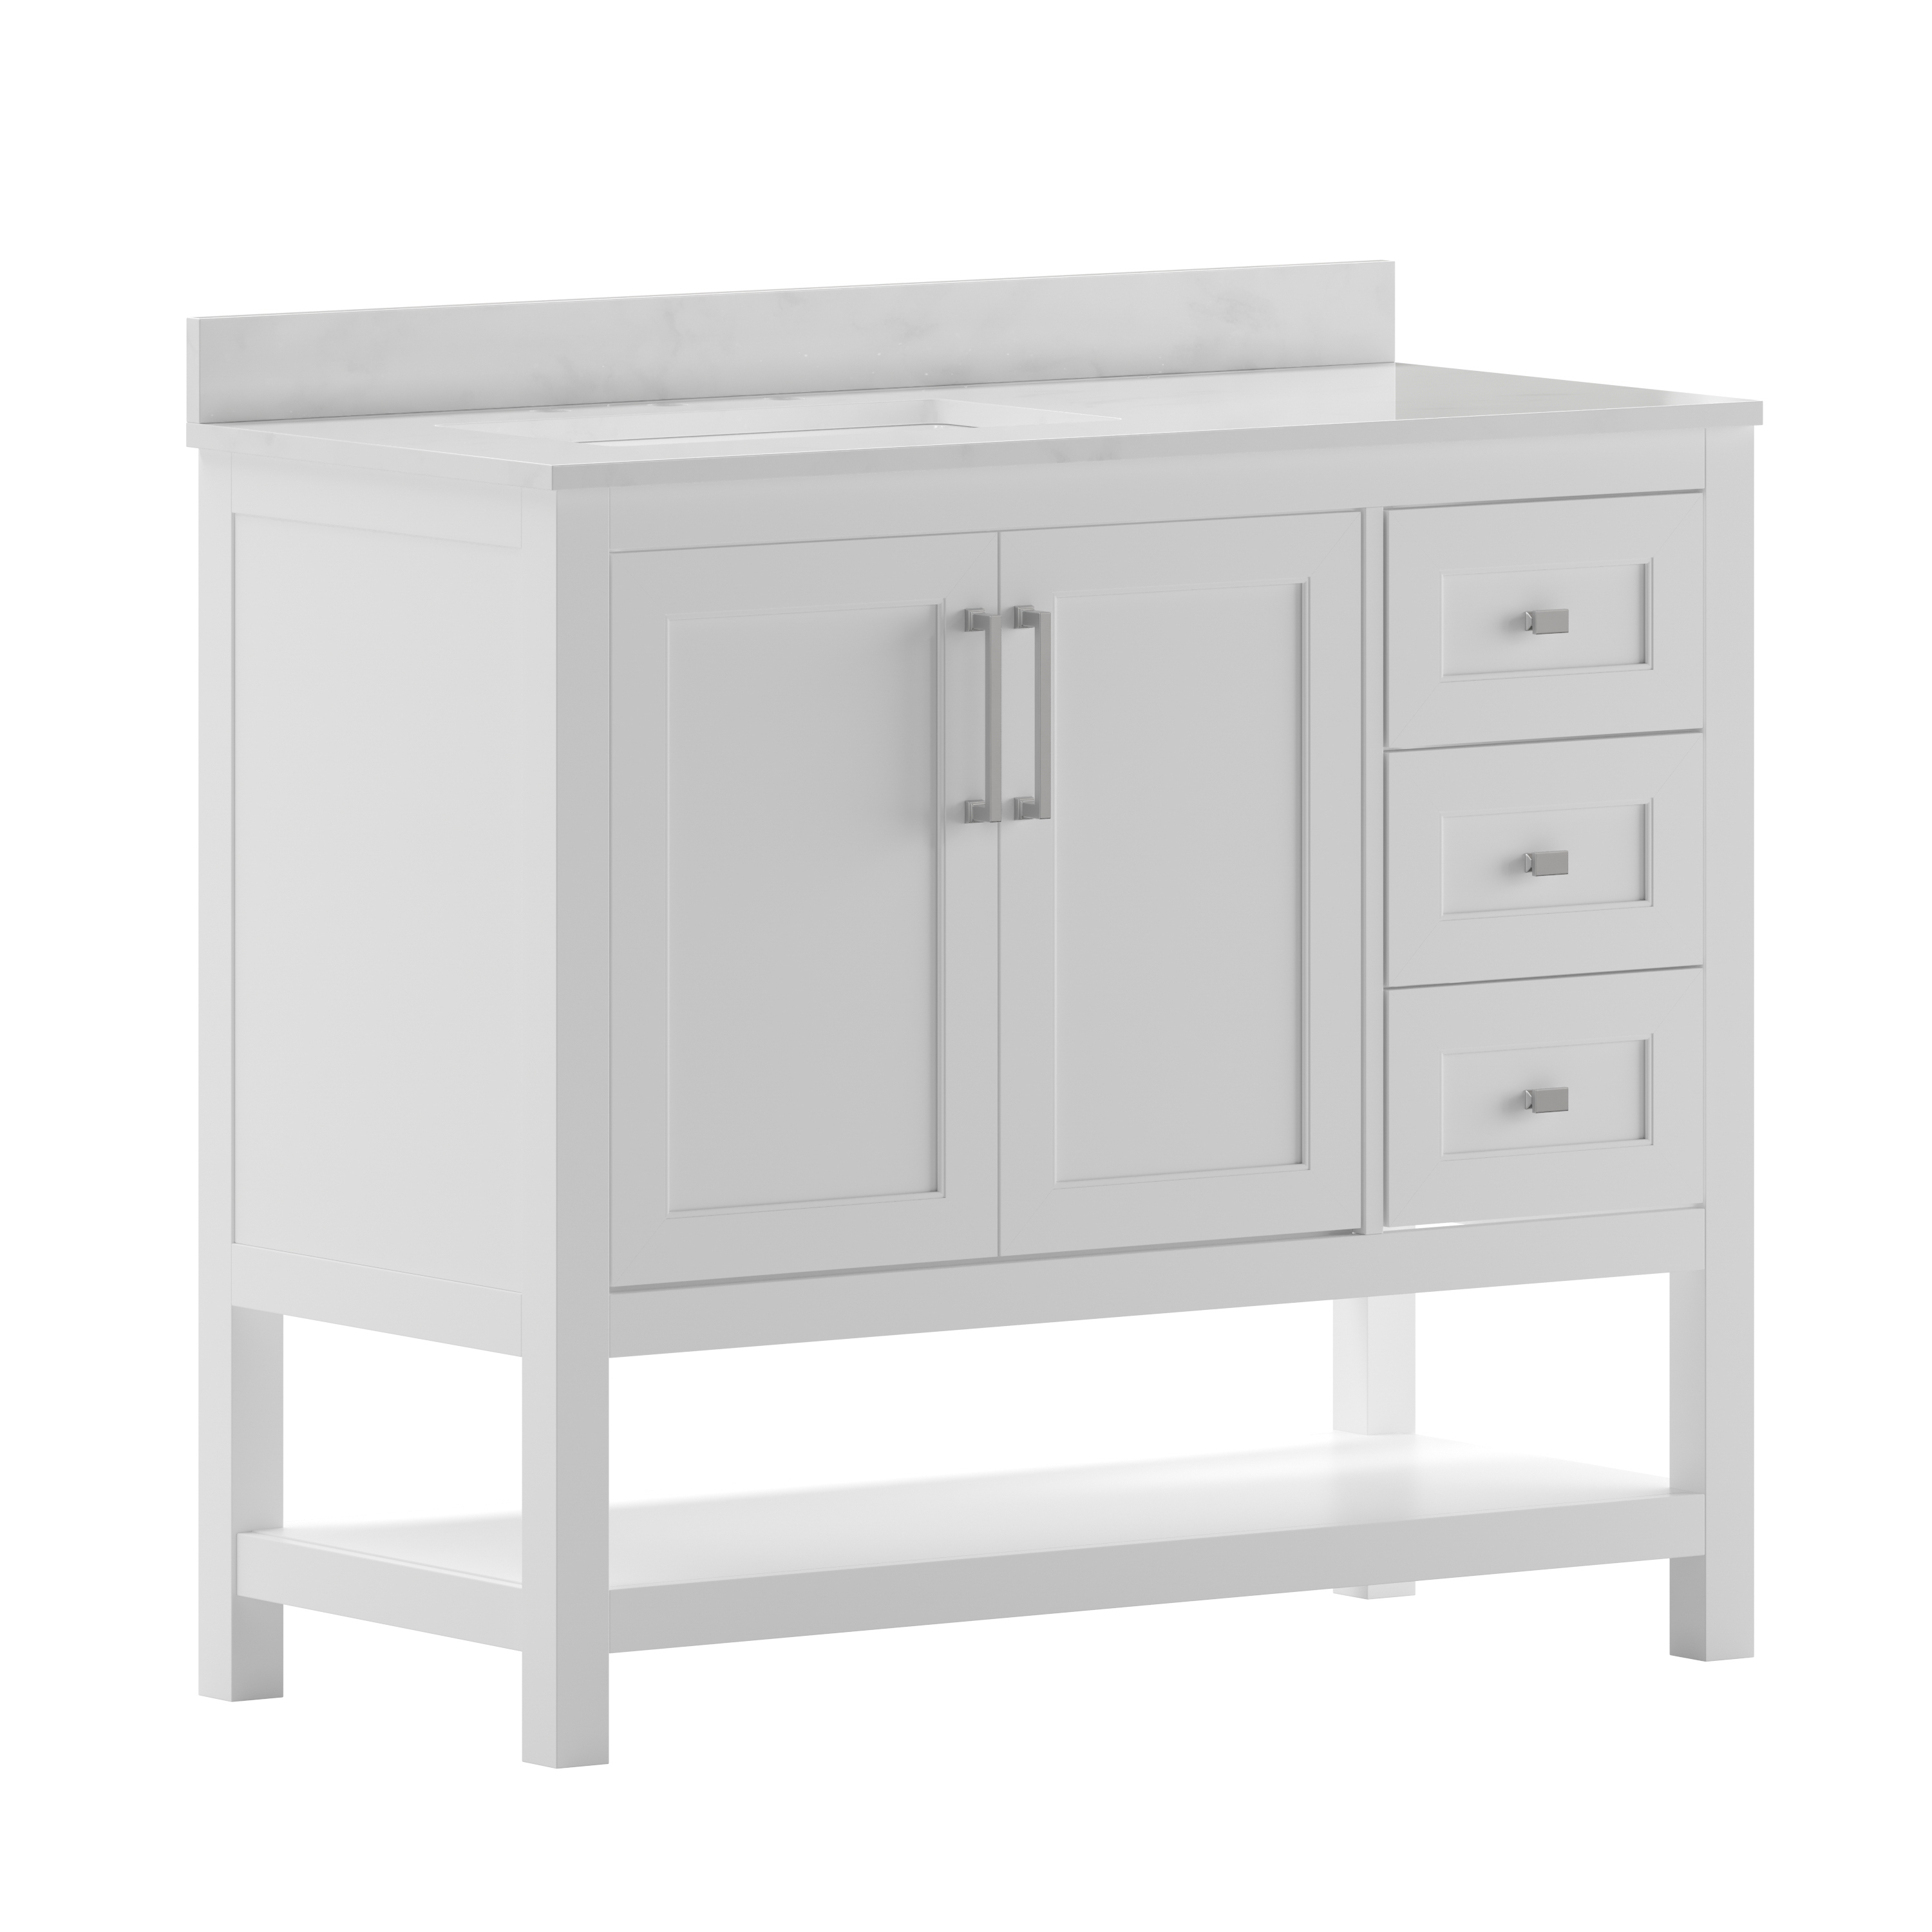 Flash Furniture FS-VEGA42-WH-GG 42" Bathroom Vanity with Sink Combo, Storage Cabinet with Soft Close Doors, Open Shelf and 3 Drawers, Carrara Marble Finish Countertop, White/White